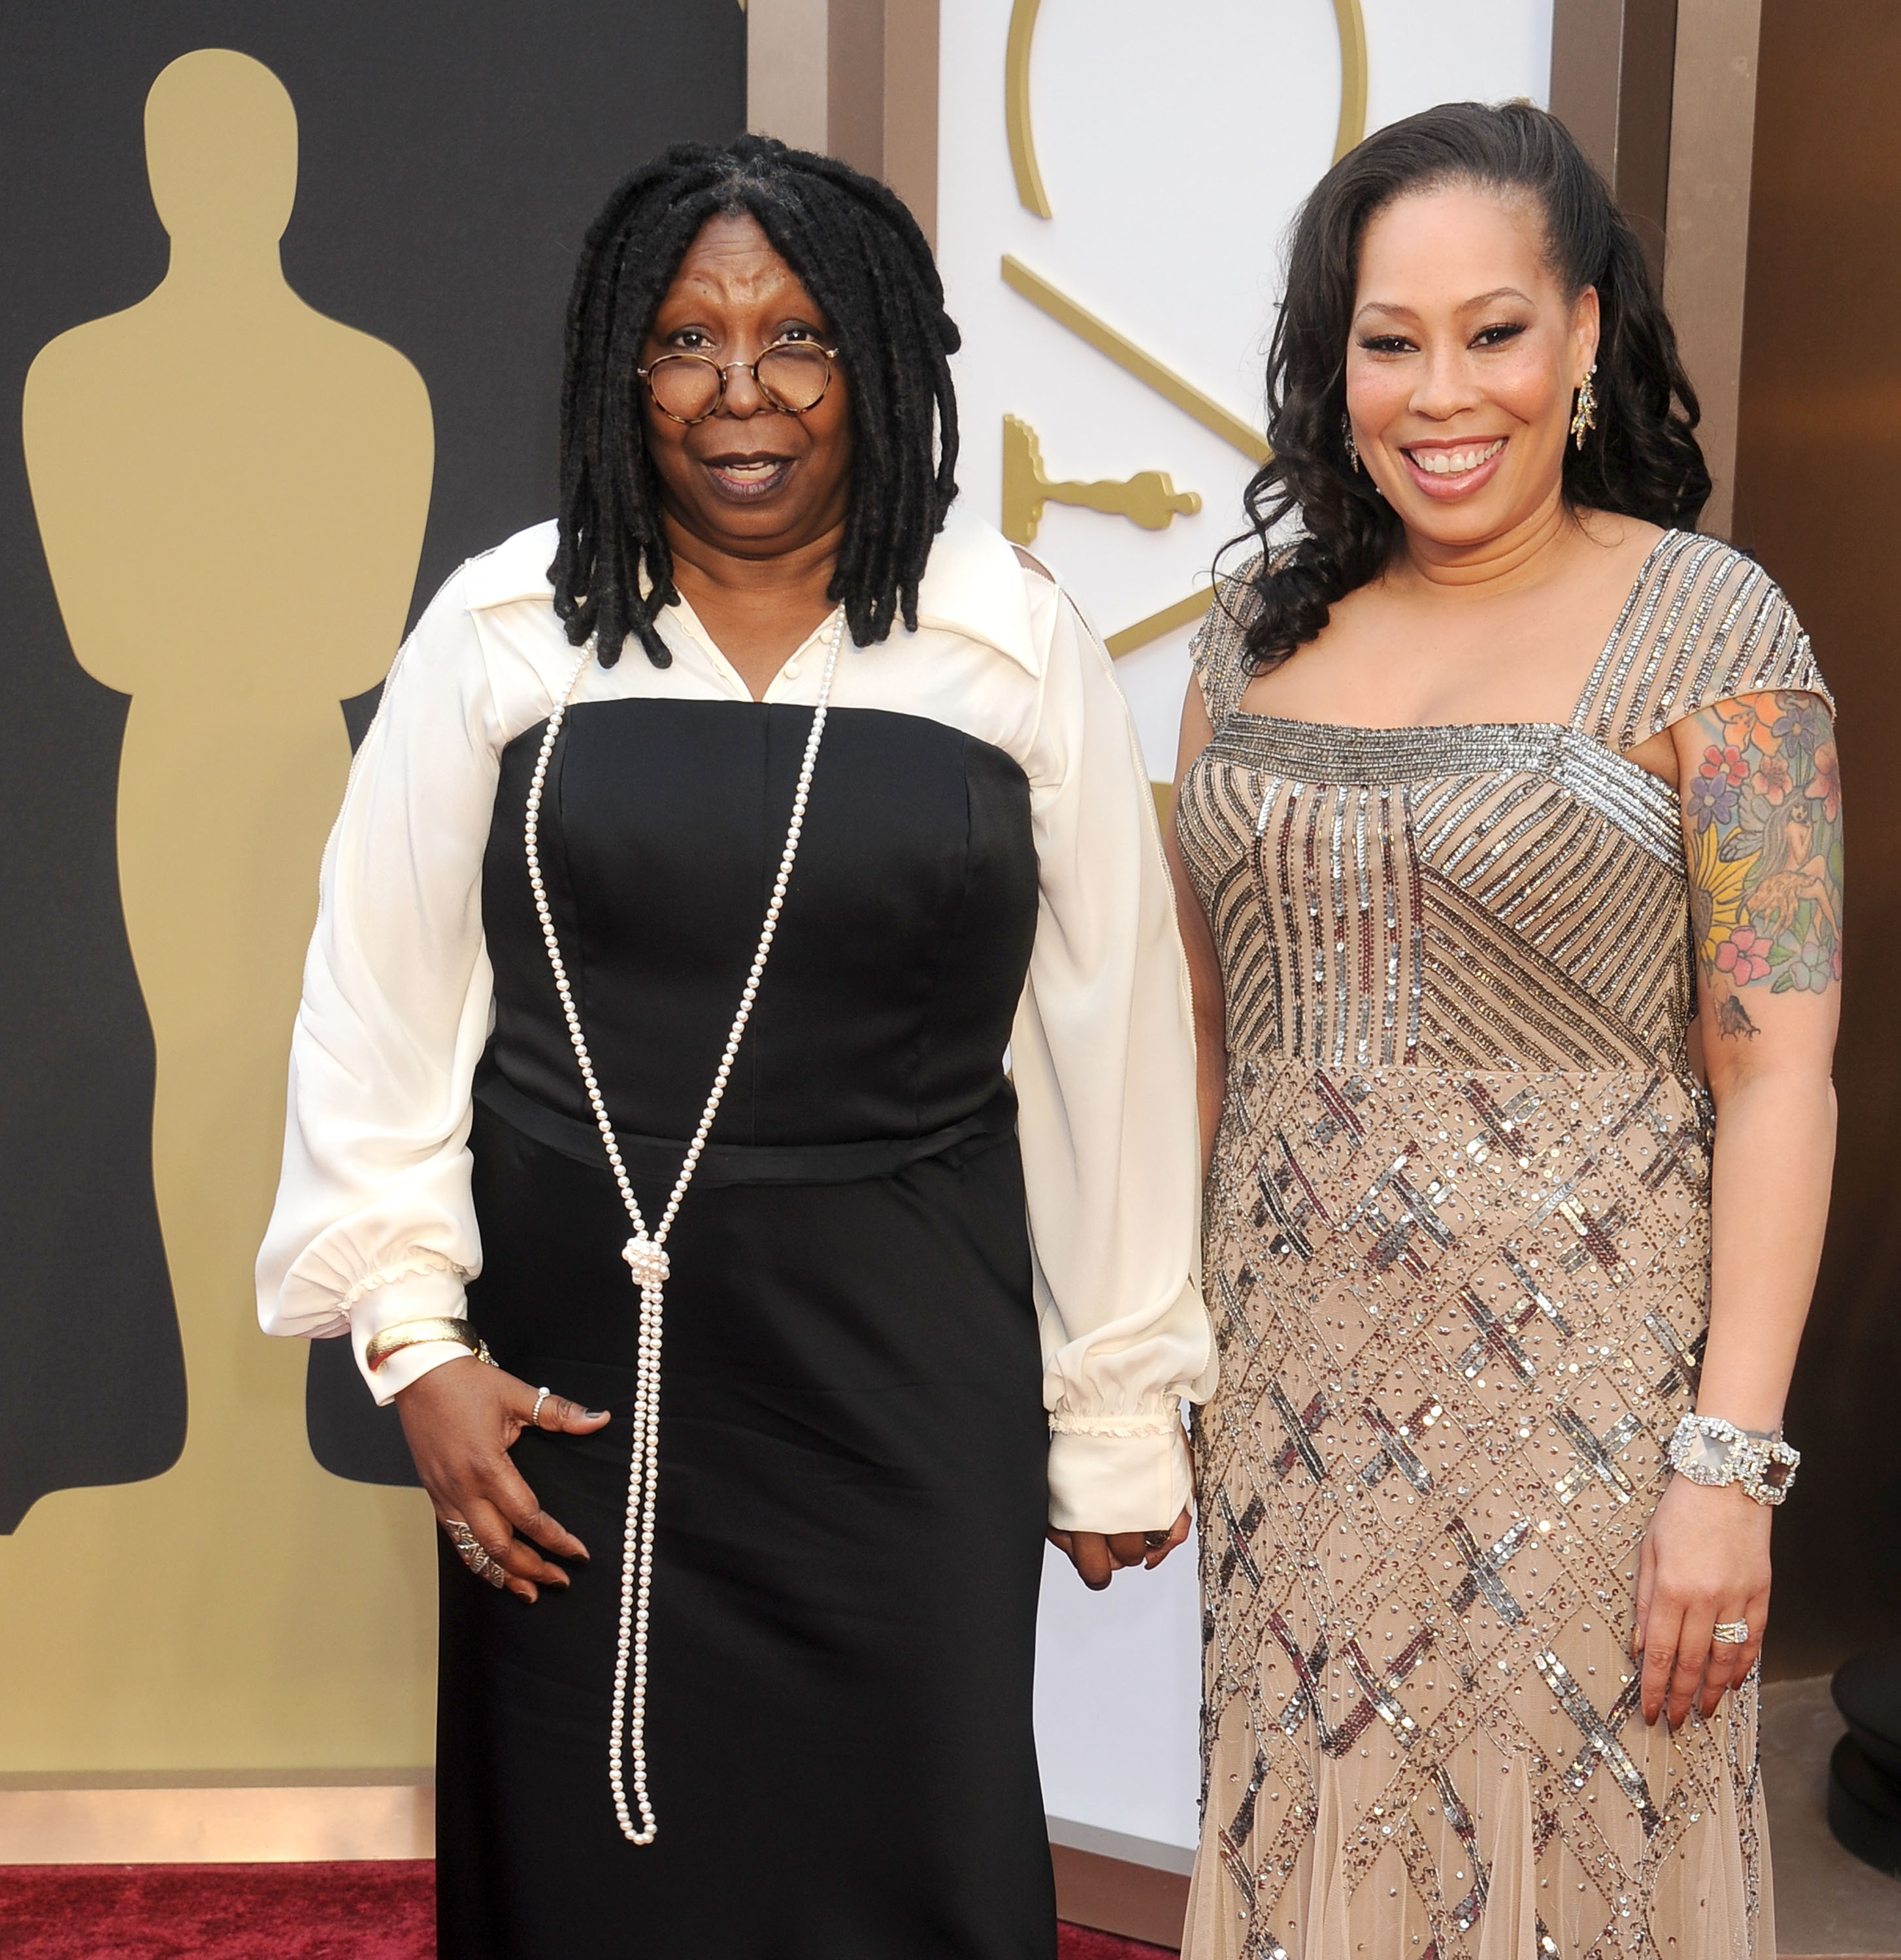 Whoopi Goldberg and Alex Martin at the 86th Annual Academy Awards in Hollywood, 2014 | Source: Getty Images